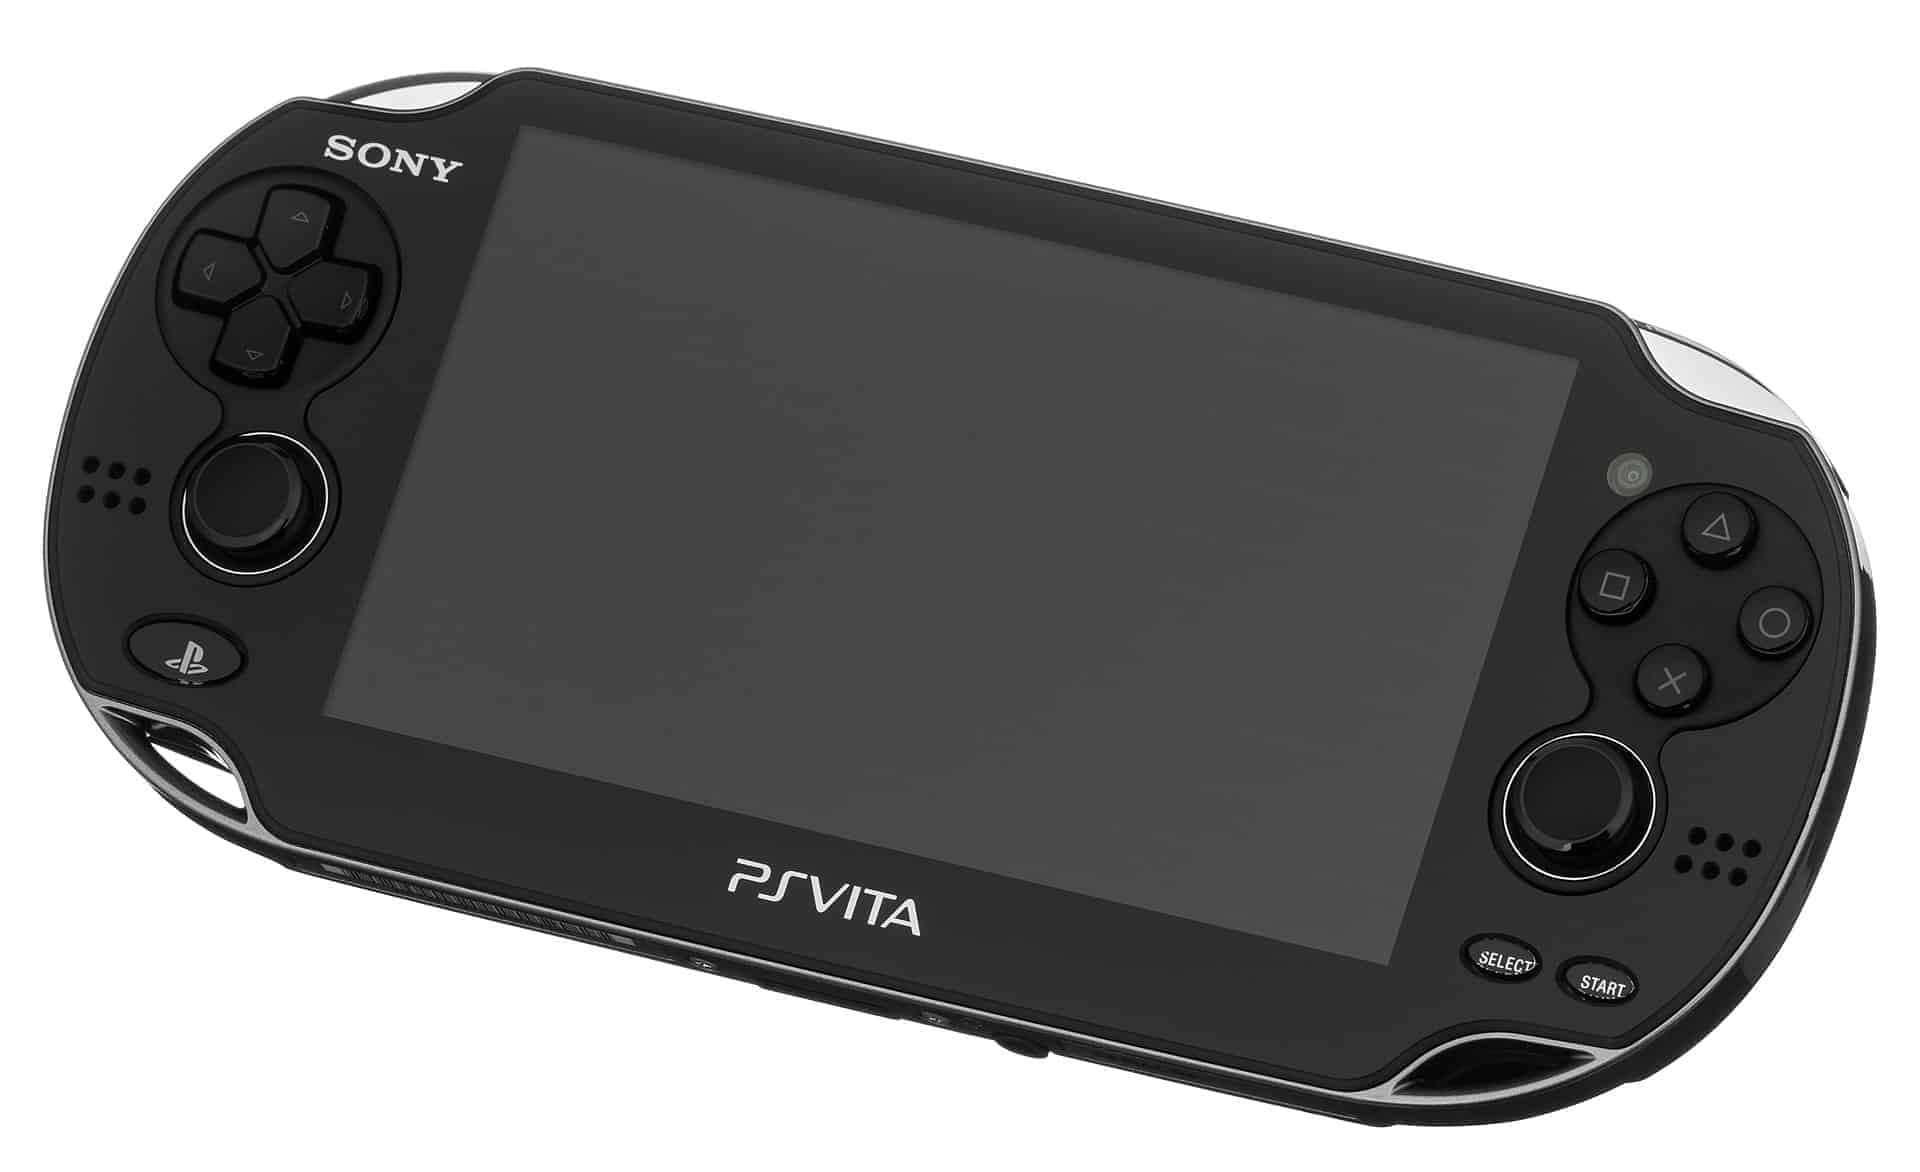 PS Vita – Is It Worth It To Buy This Portable Gaming Console? in May